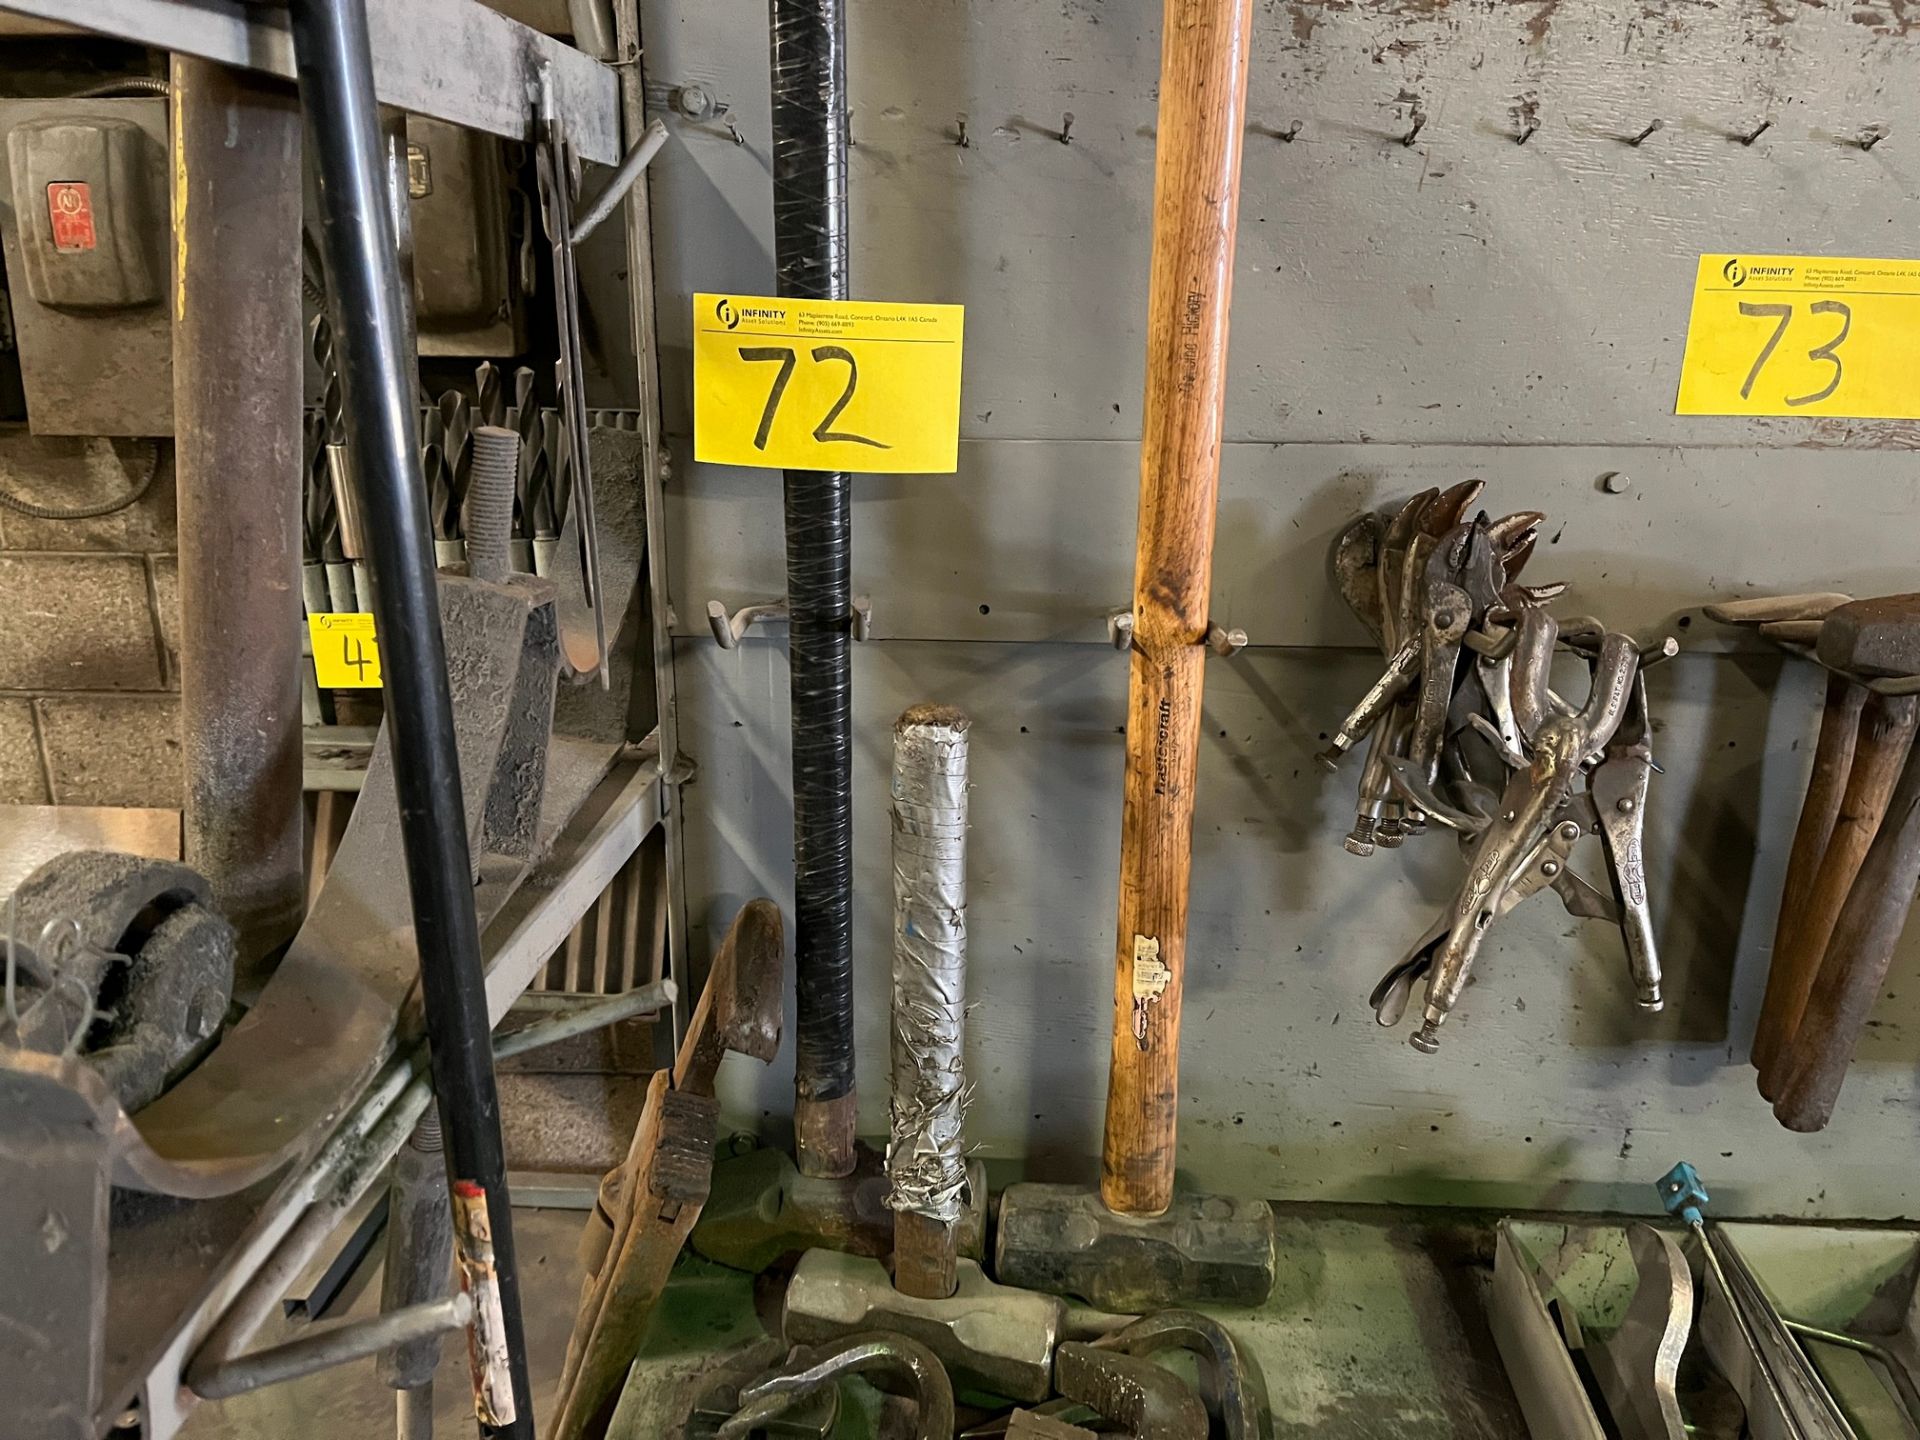 LOT OF LARGE HAND TOOLS, SLED HAMMER, BOLT CUTTERS, PIPE WRENCHES, ETC. - Image 2 of 4